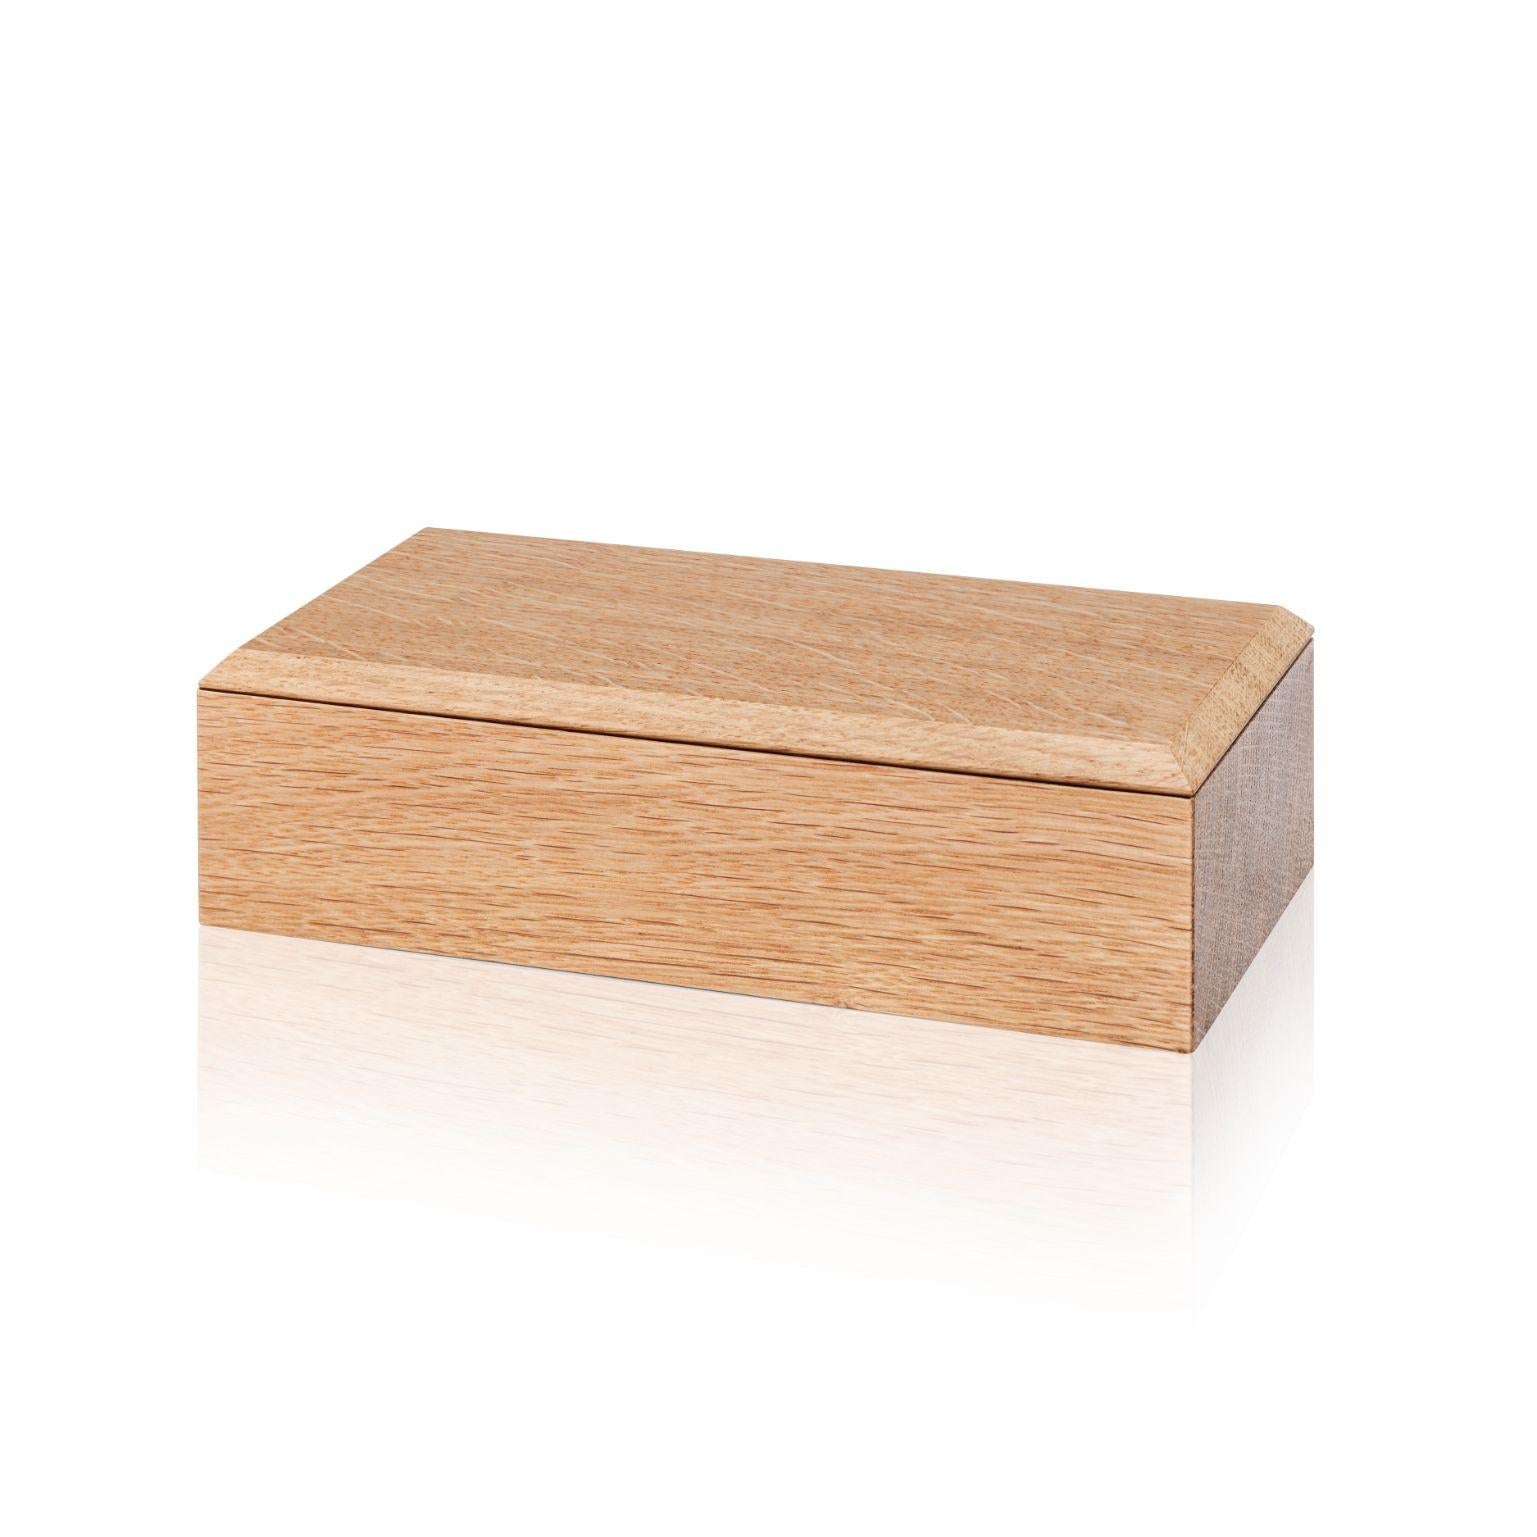 Pen Pino Boxes by Antrei Hartikainen
Materials: Oak, Natural Oil Wax
Dimensions: W 18 / 14, D 9, H 5 / 7cm

A set of three vertical and two horizontal stacking boxes constructed of vividly grained woods. The pino boxes may be arranged in various